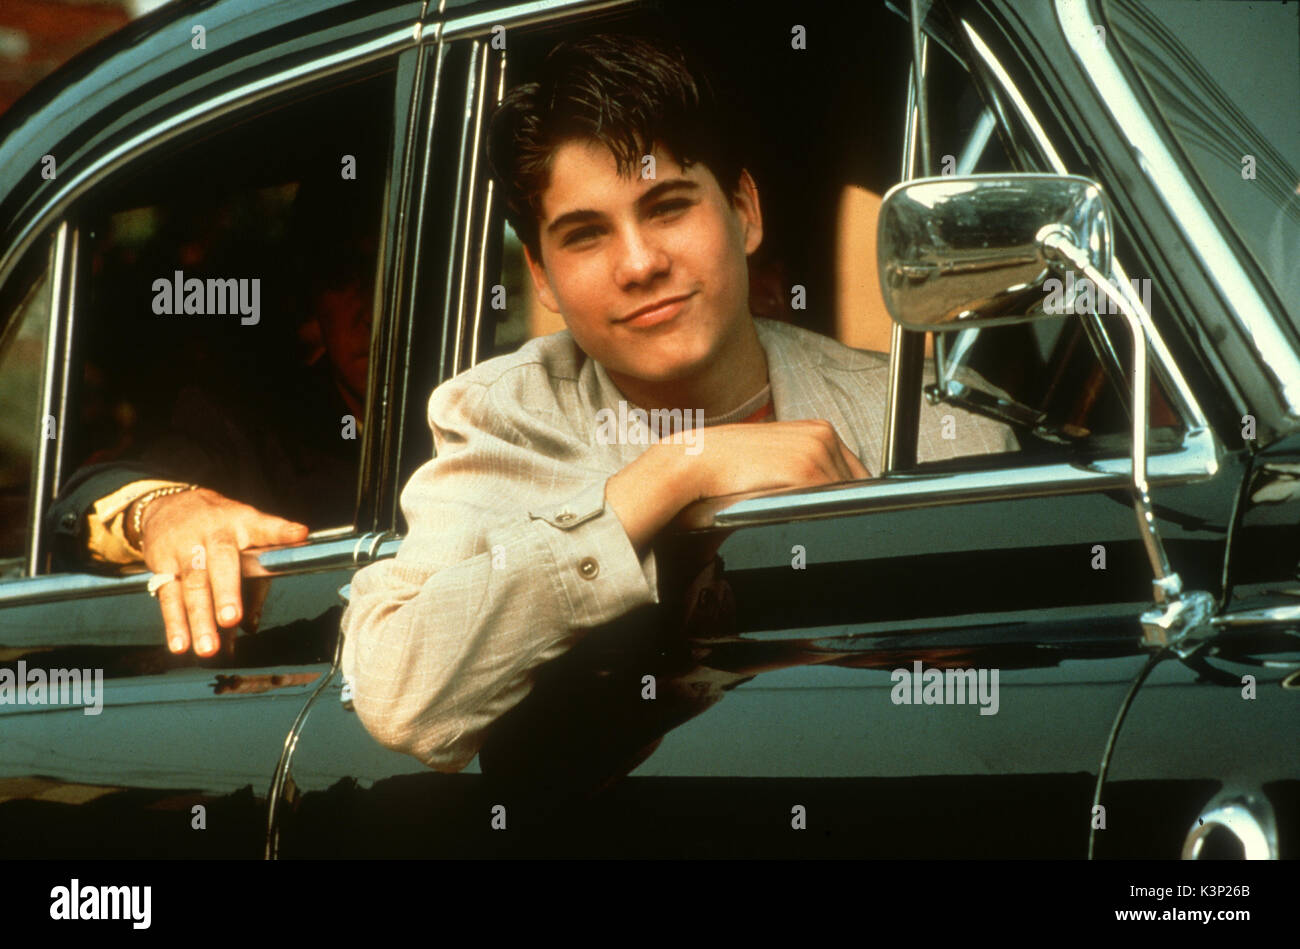 GOODFELLAS [US 1993] CHRISTOPHER SERRONE as young Henry Hil     Date: 1993 Stock Photo